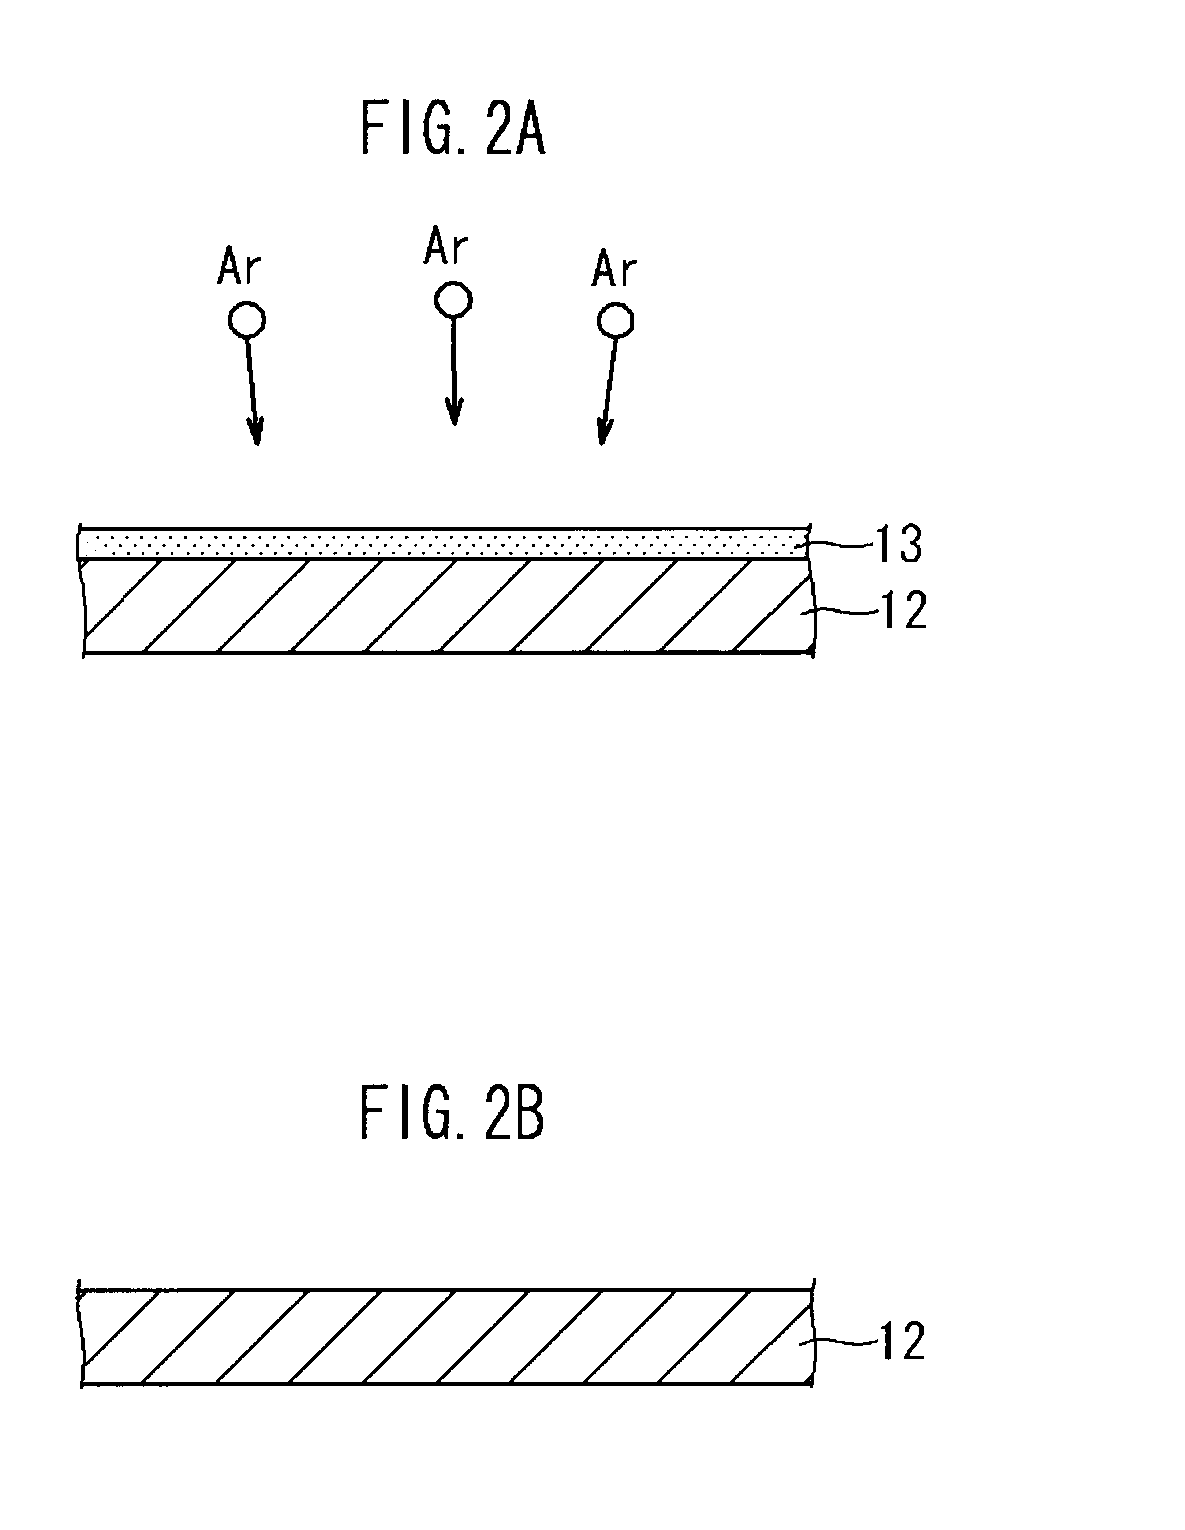 Cathode and method for manufacturing the same